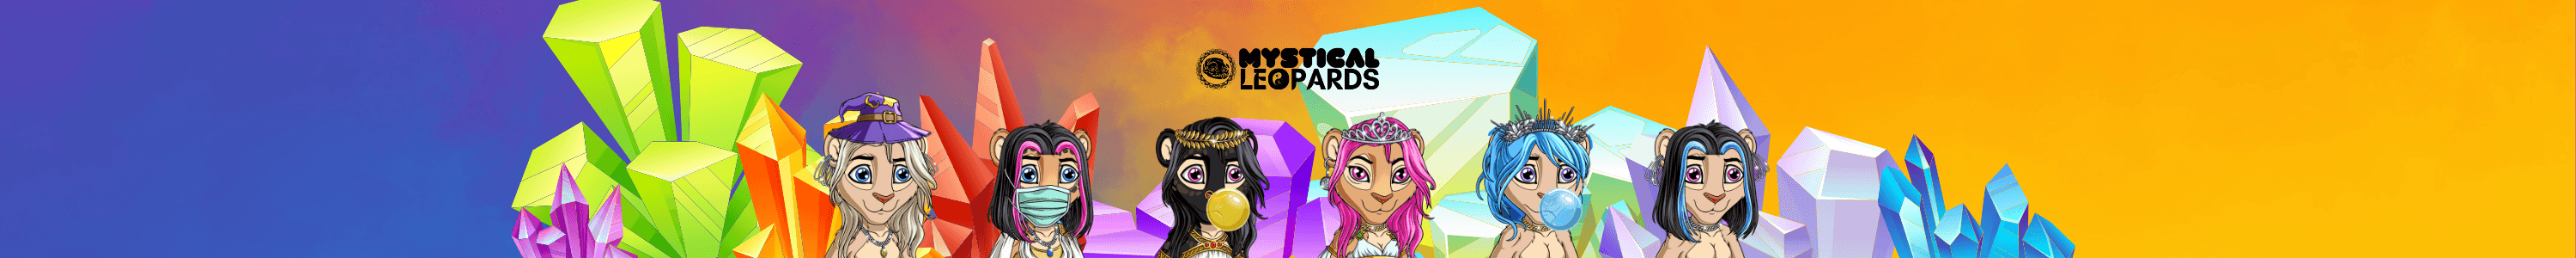 Official_MysticalLeopards 横幅